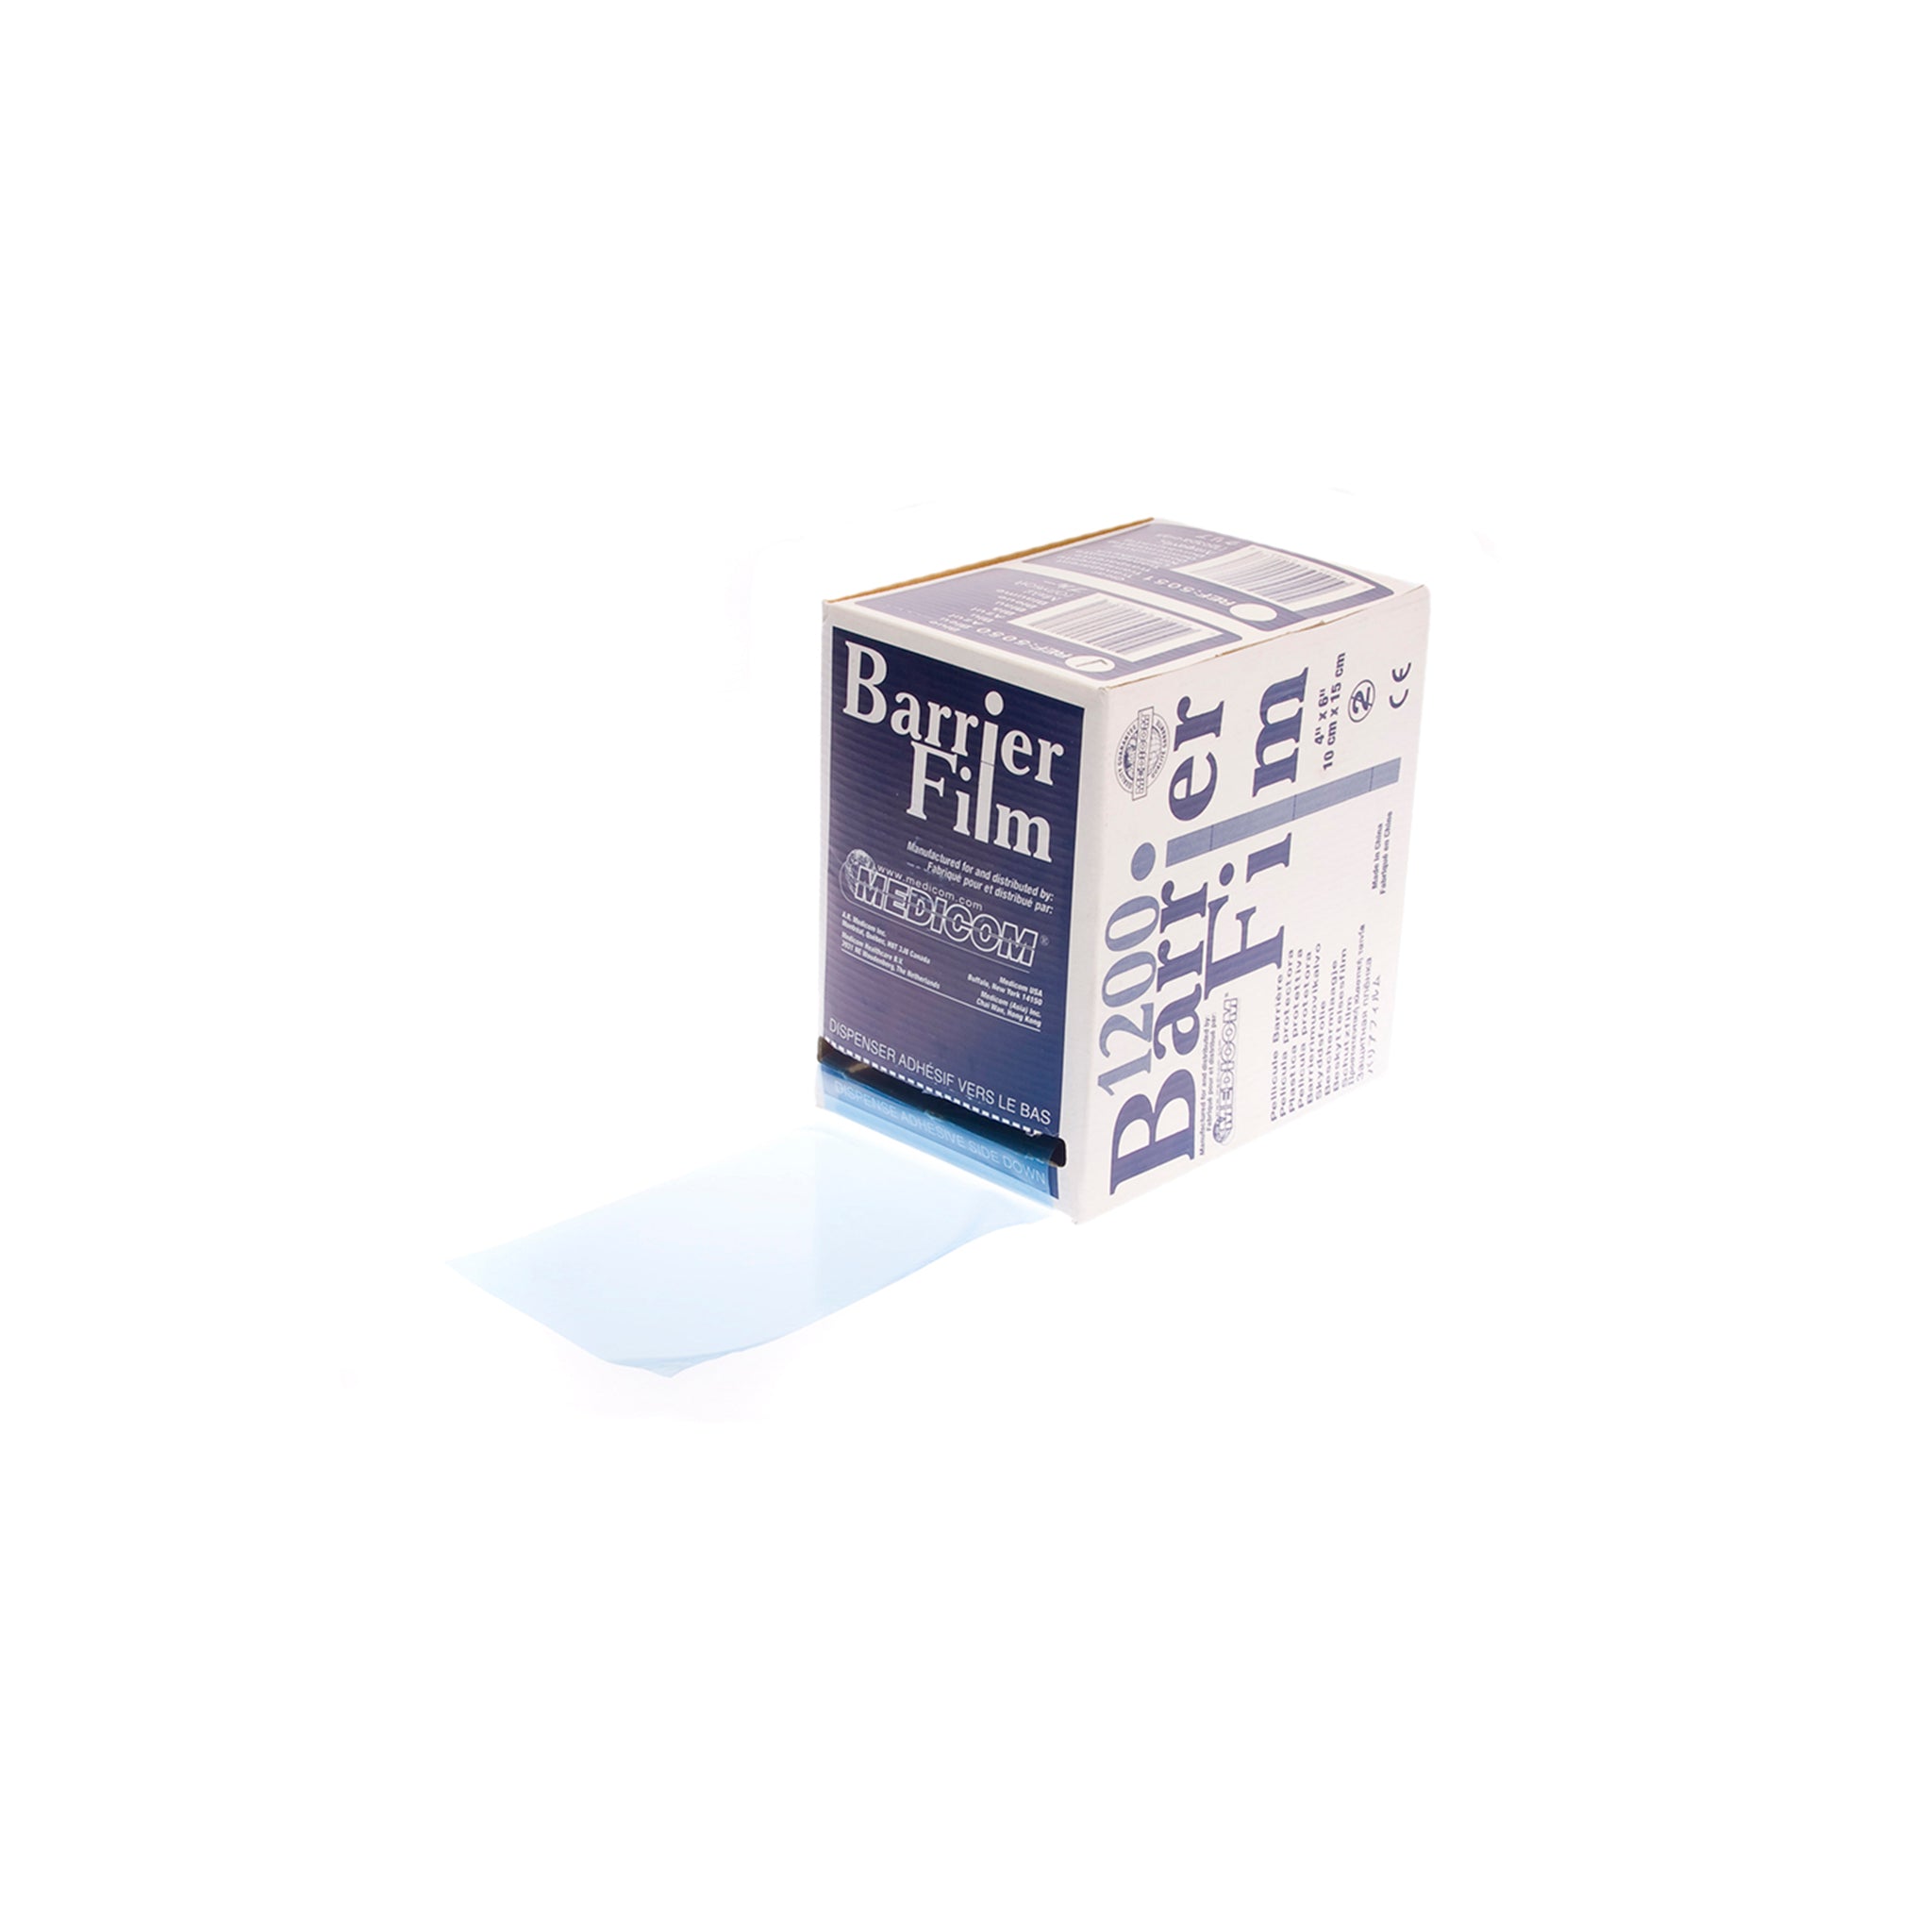 Starryshine Universal Barrier Film, Blue 4 Inch x 6 Inch, 1200 Sheets For  Sale In-store & Online - Beacon Tattoo Supply in Las Vegas, NV